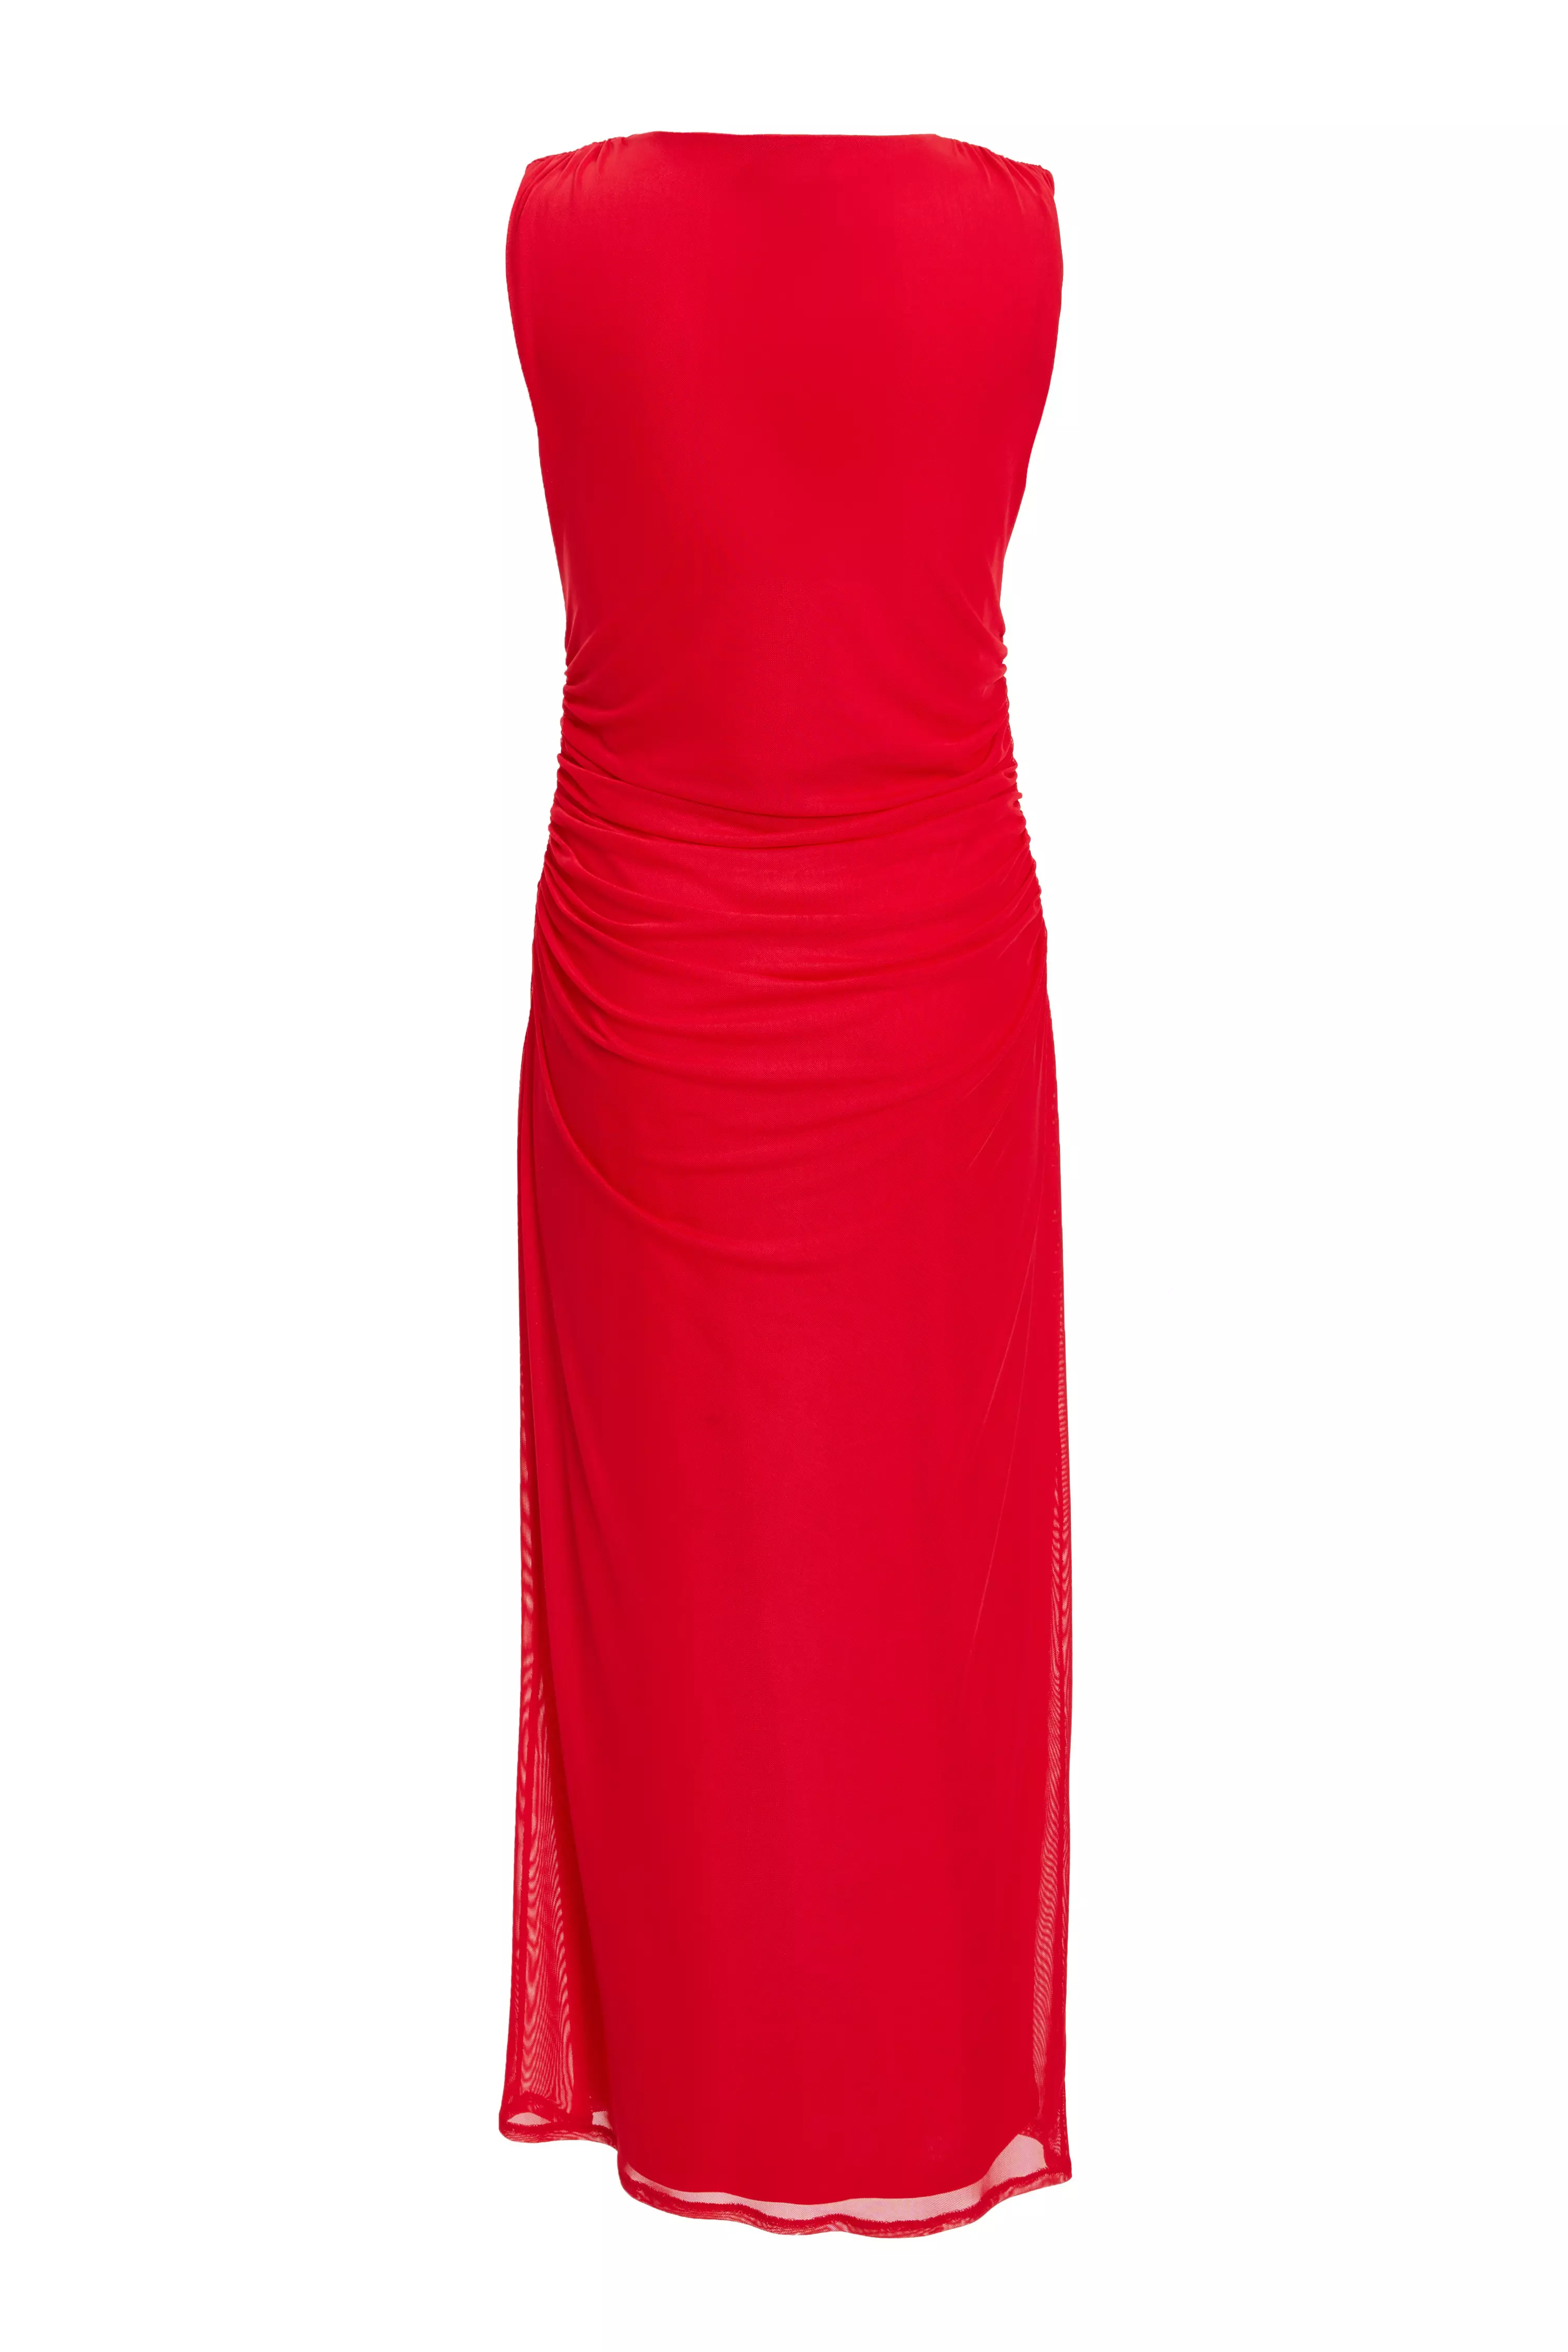 Red Mesh Ruched Boydcon Midaxi Dress